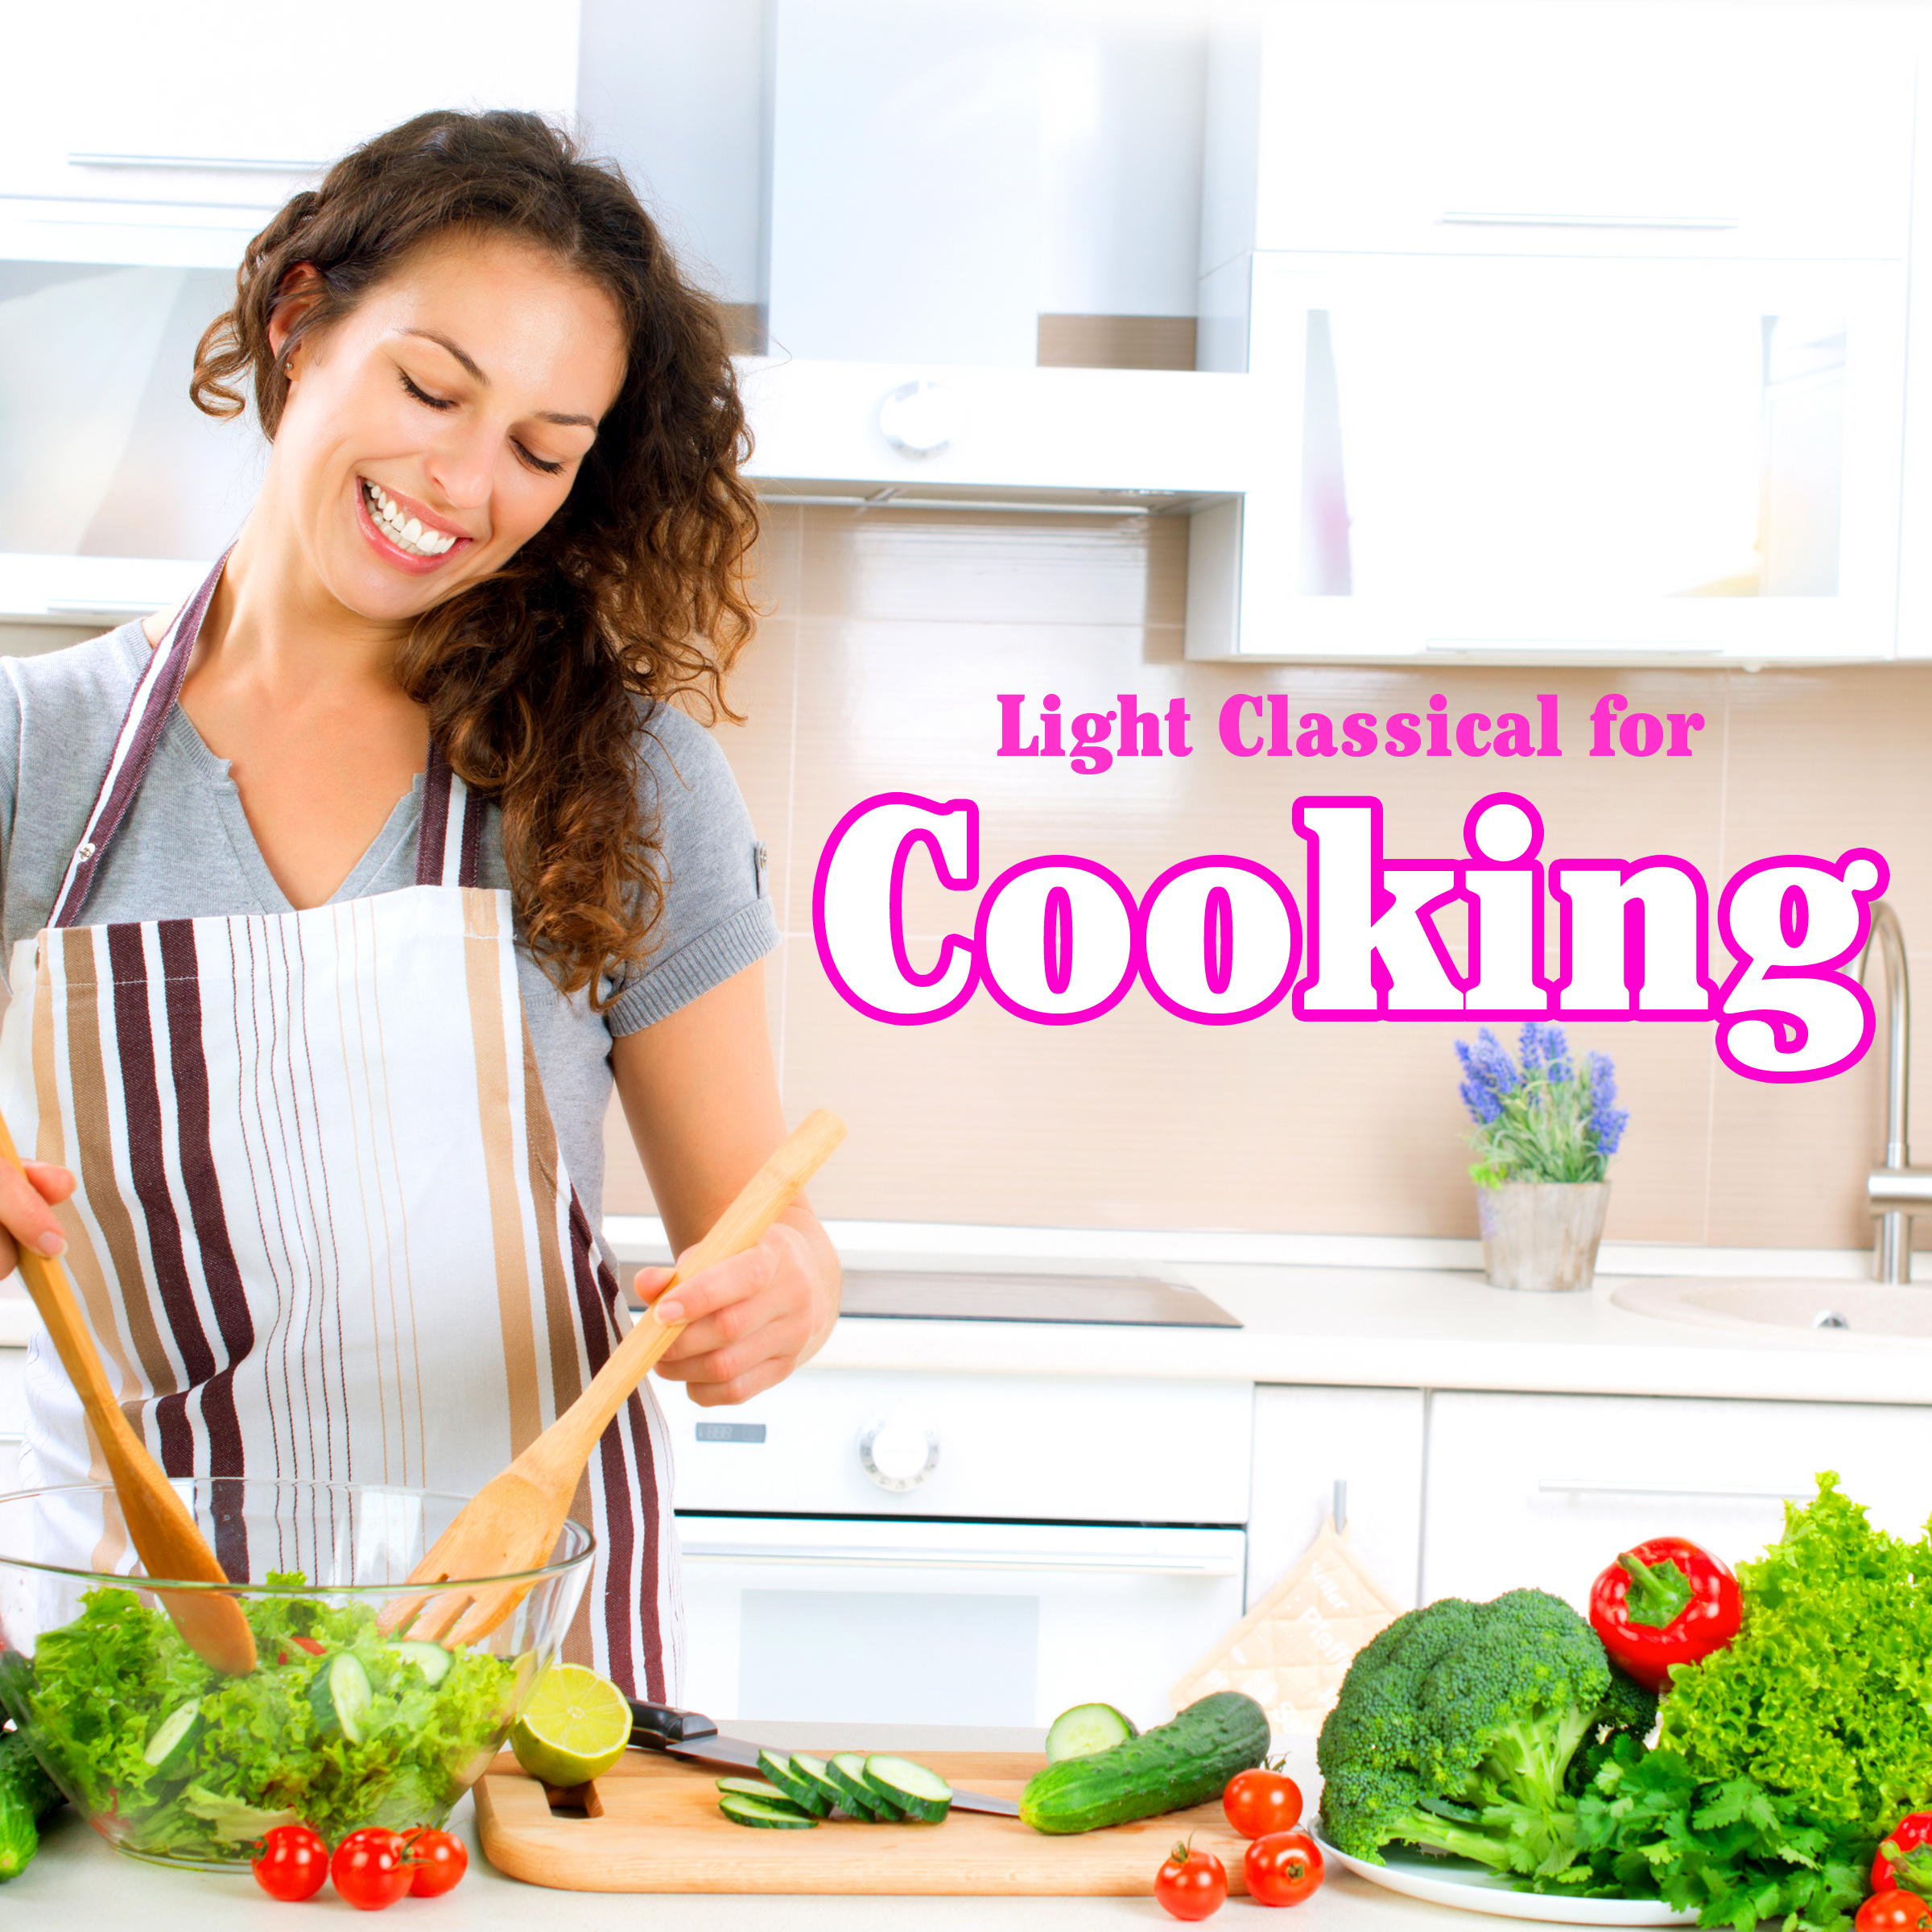 Light Classical for Cooking